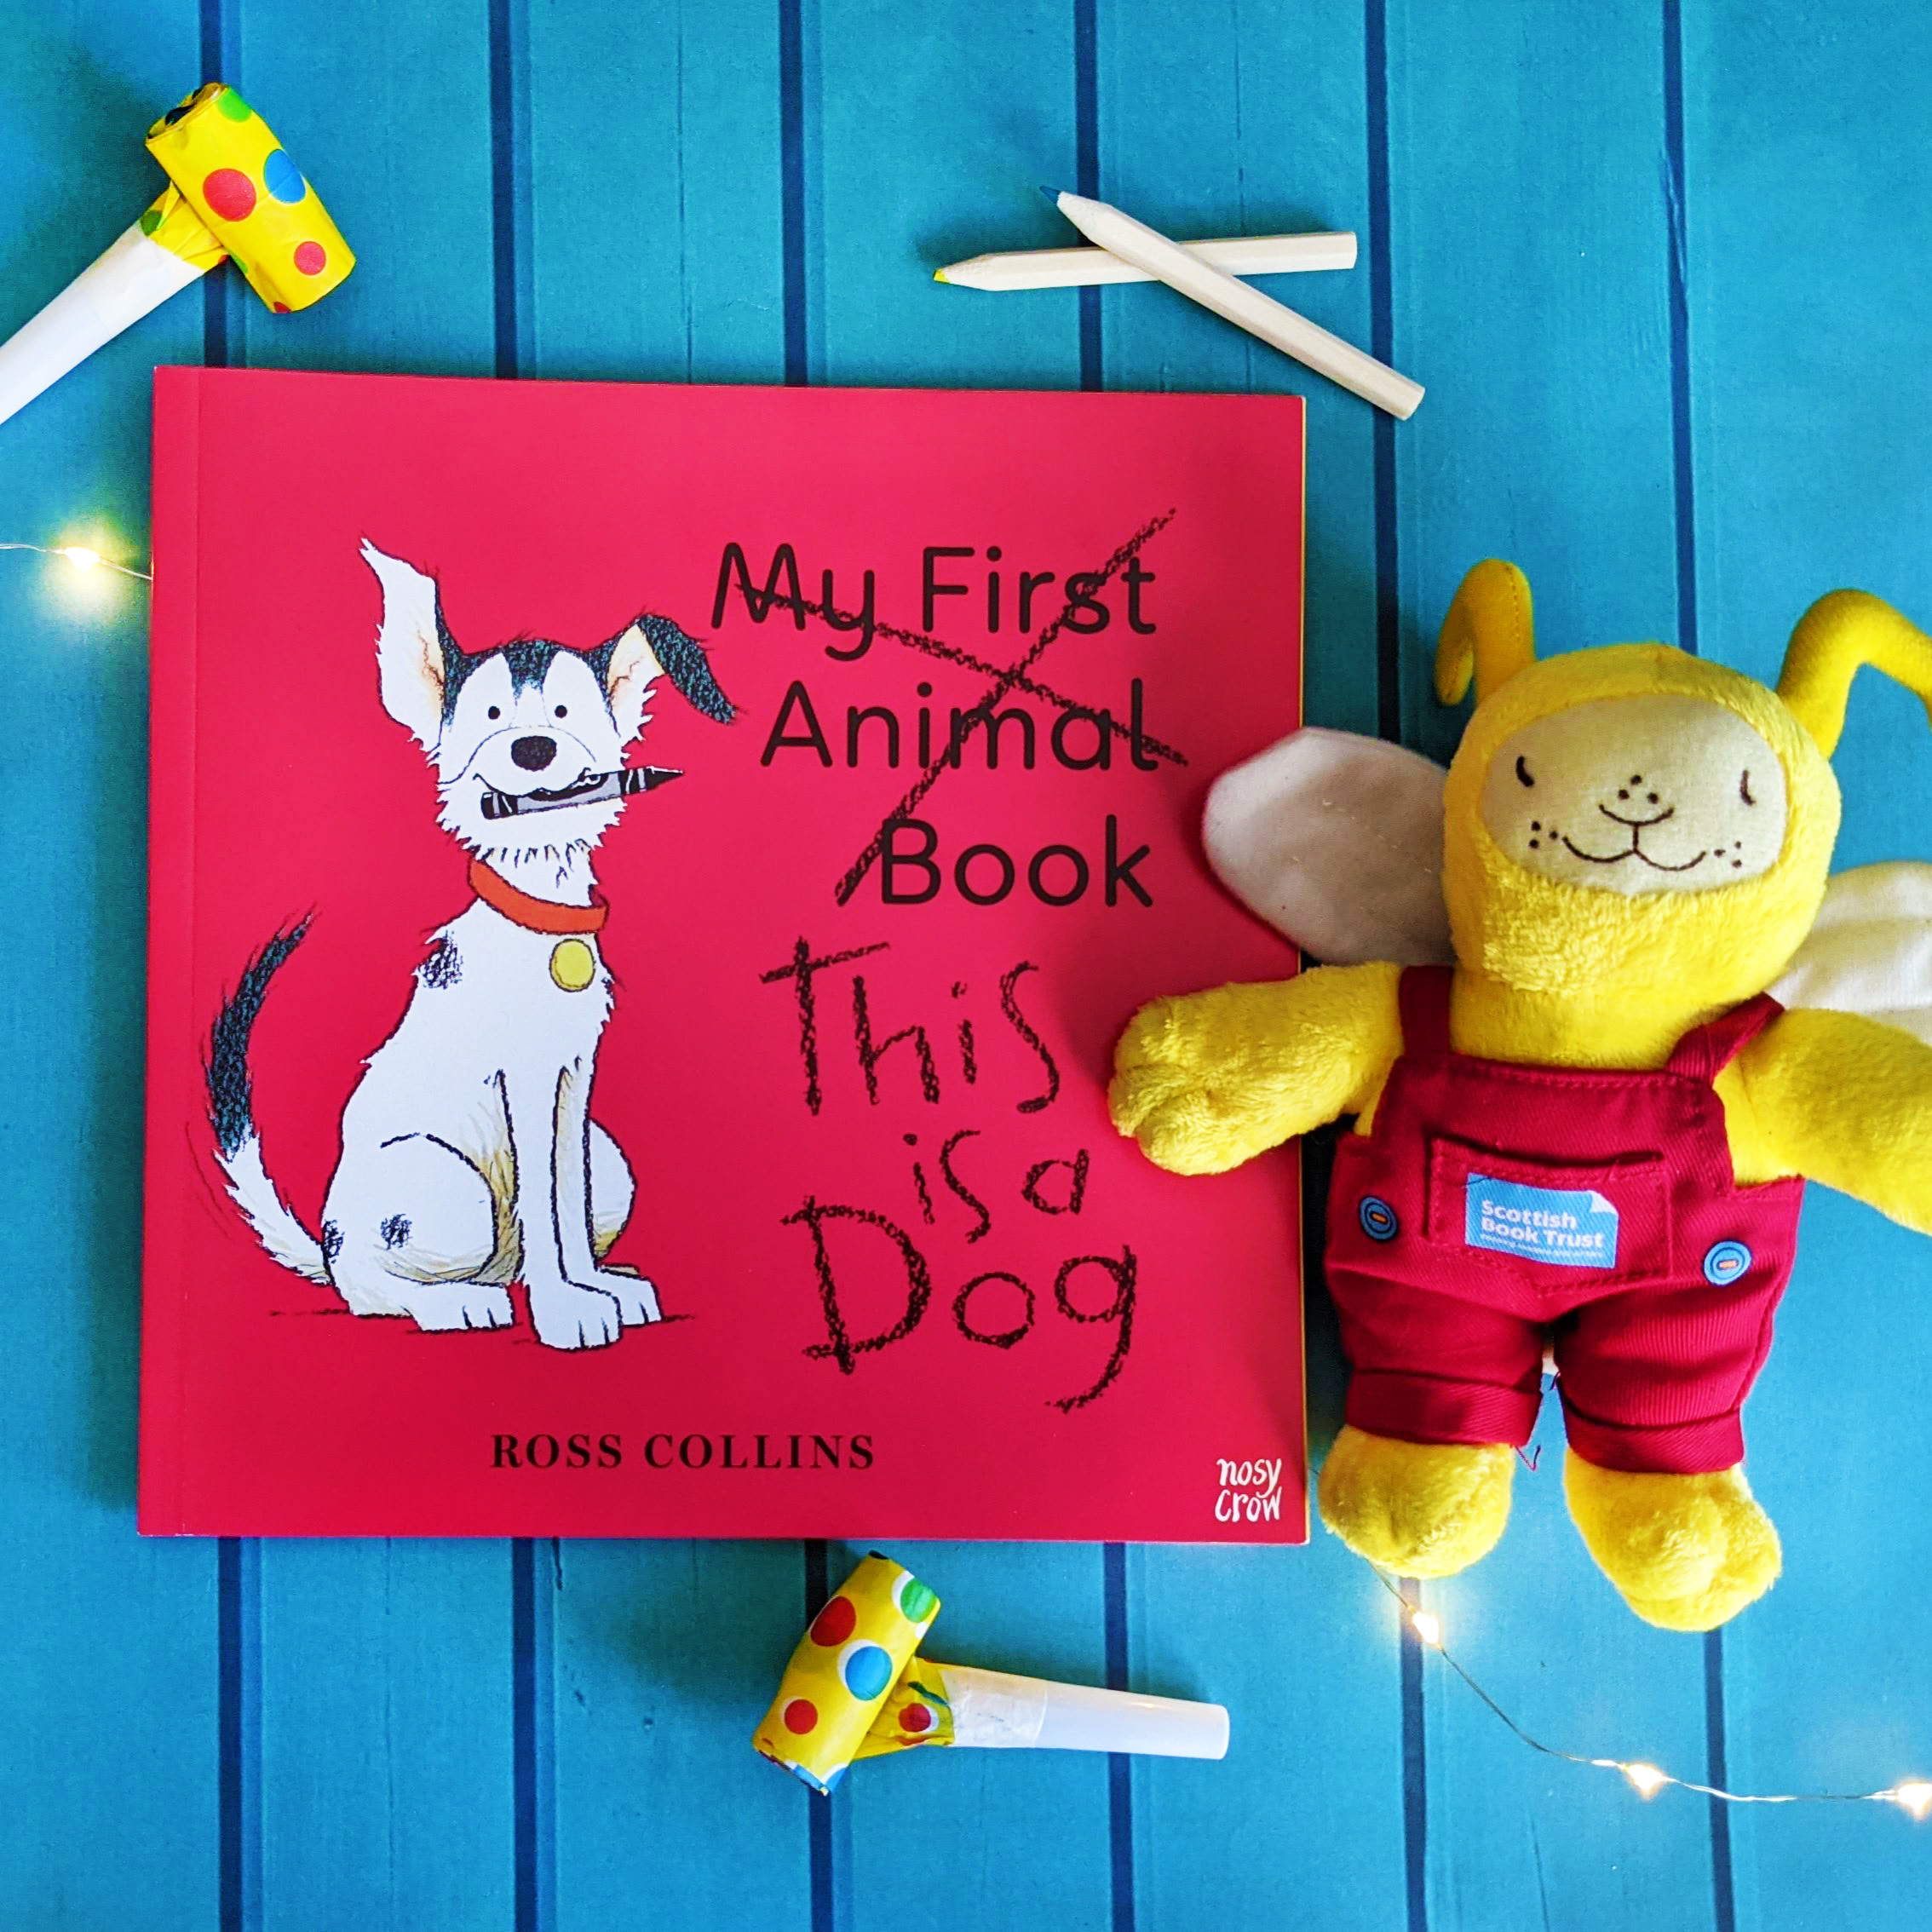 Rosss latest awardwinning book, This is a Dog, published by Nosy Crow. Pic: Nosy Crow